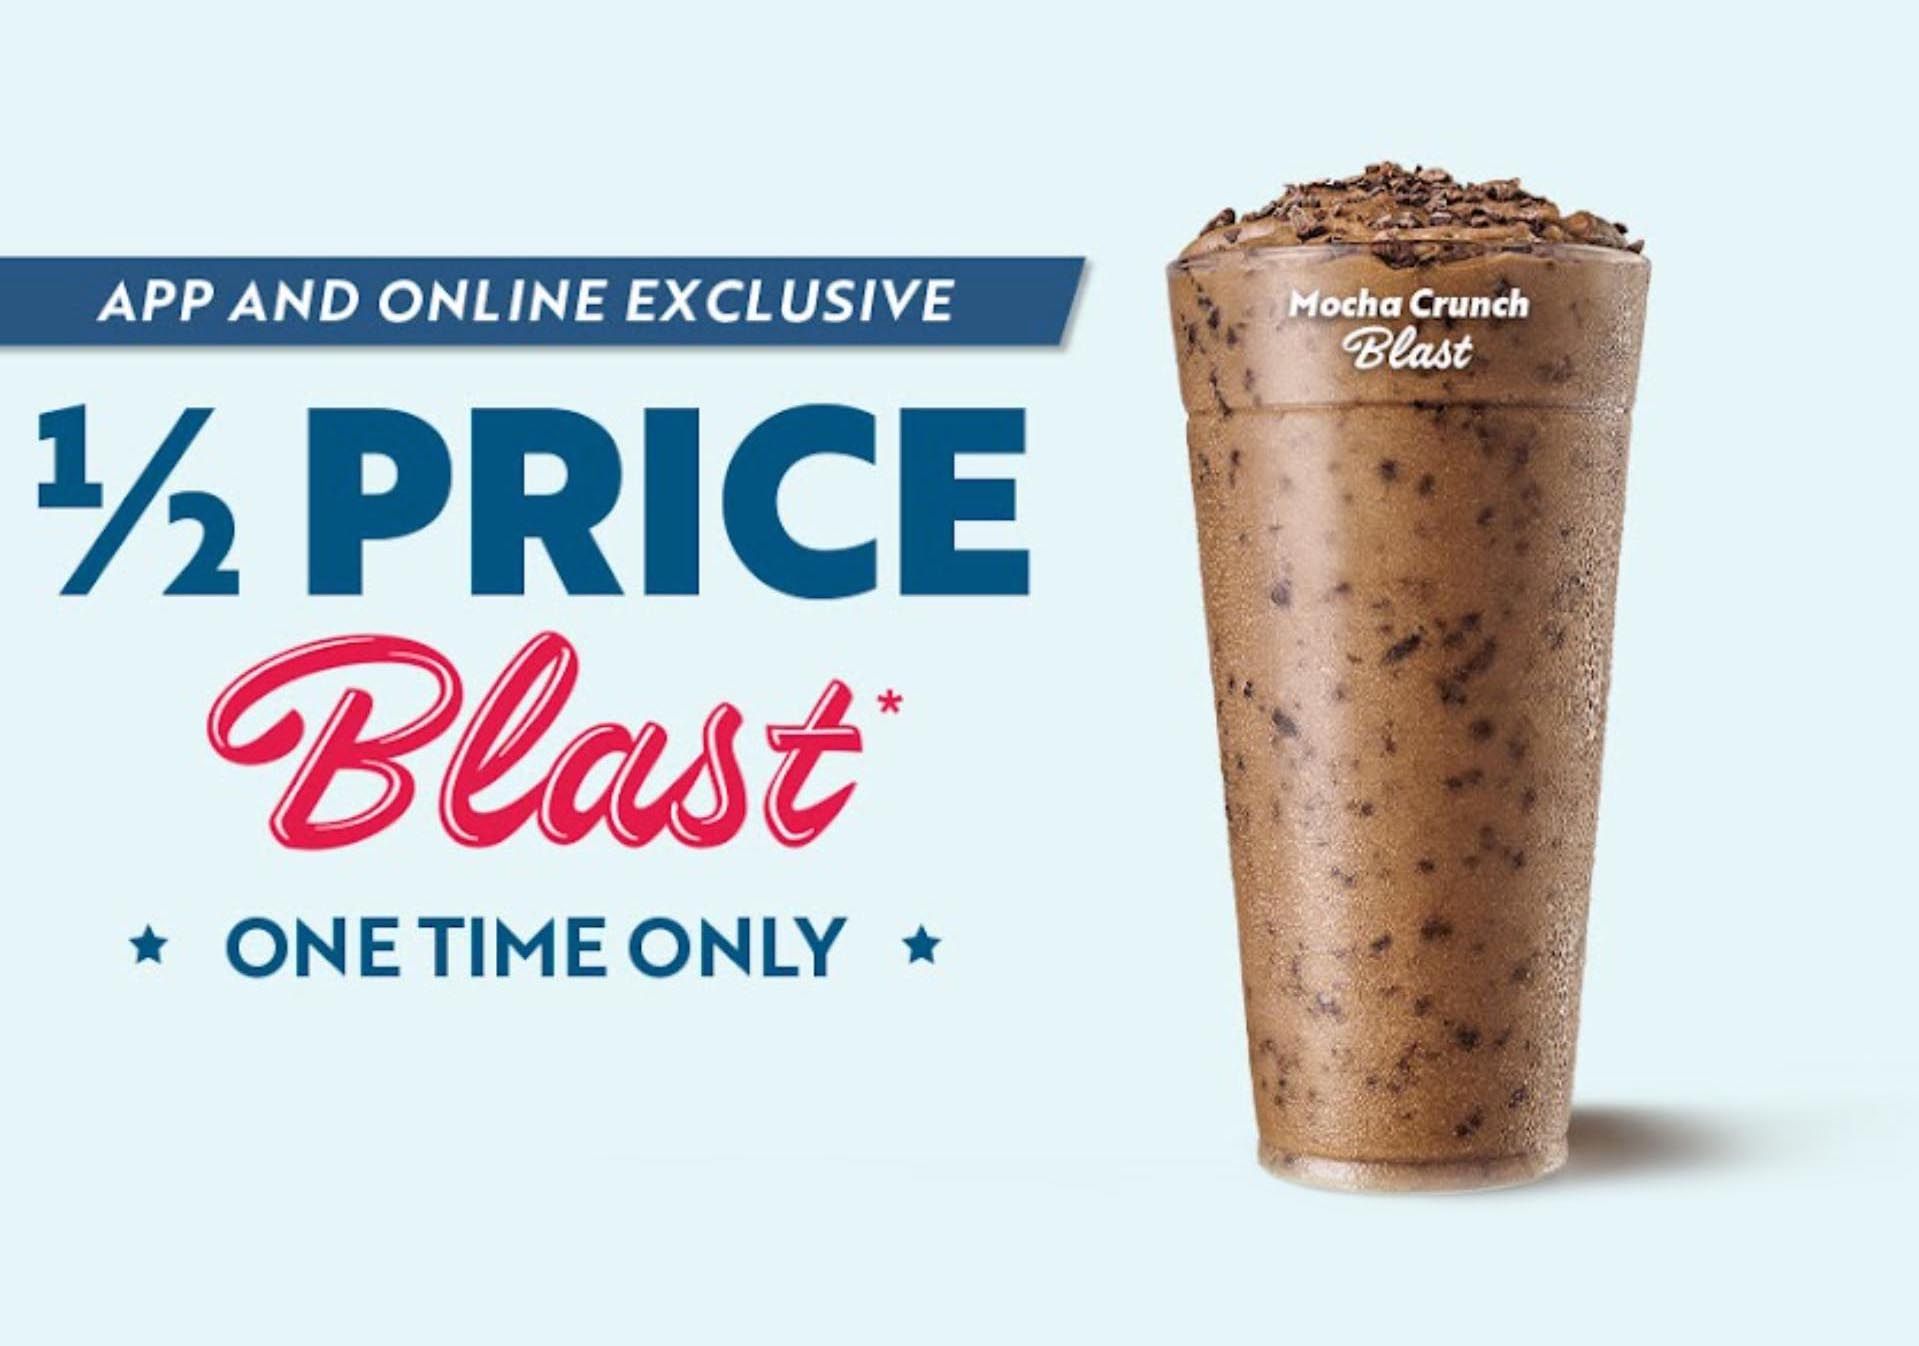 Sonic Rewards Members Can Now Get a Half Priced Mocha Crunch Blast with an In-app or Online Order